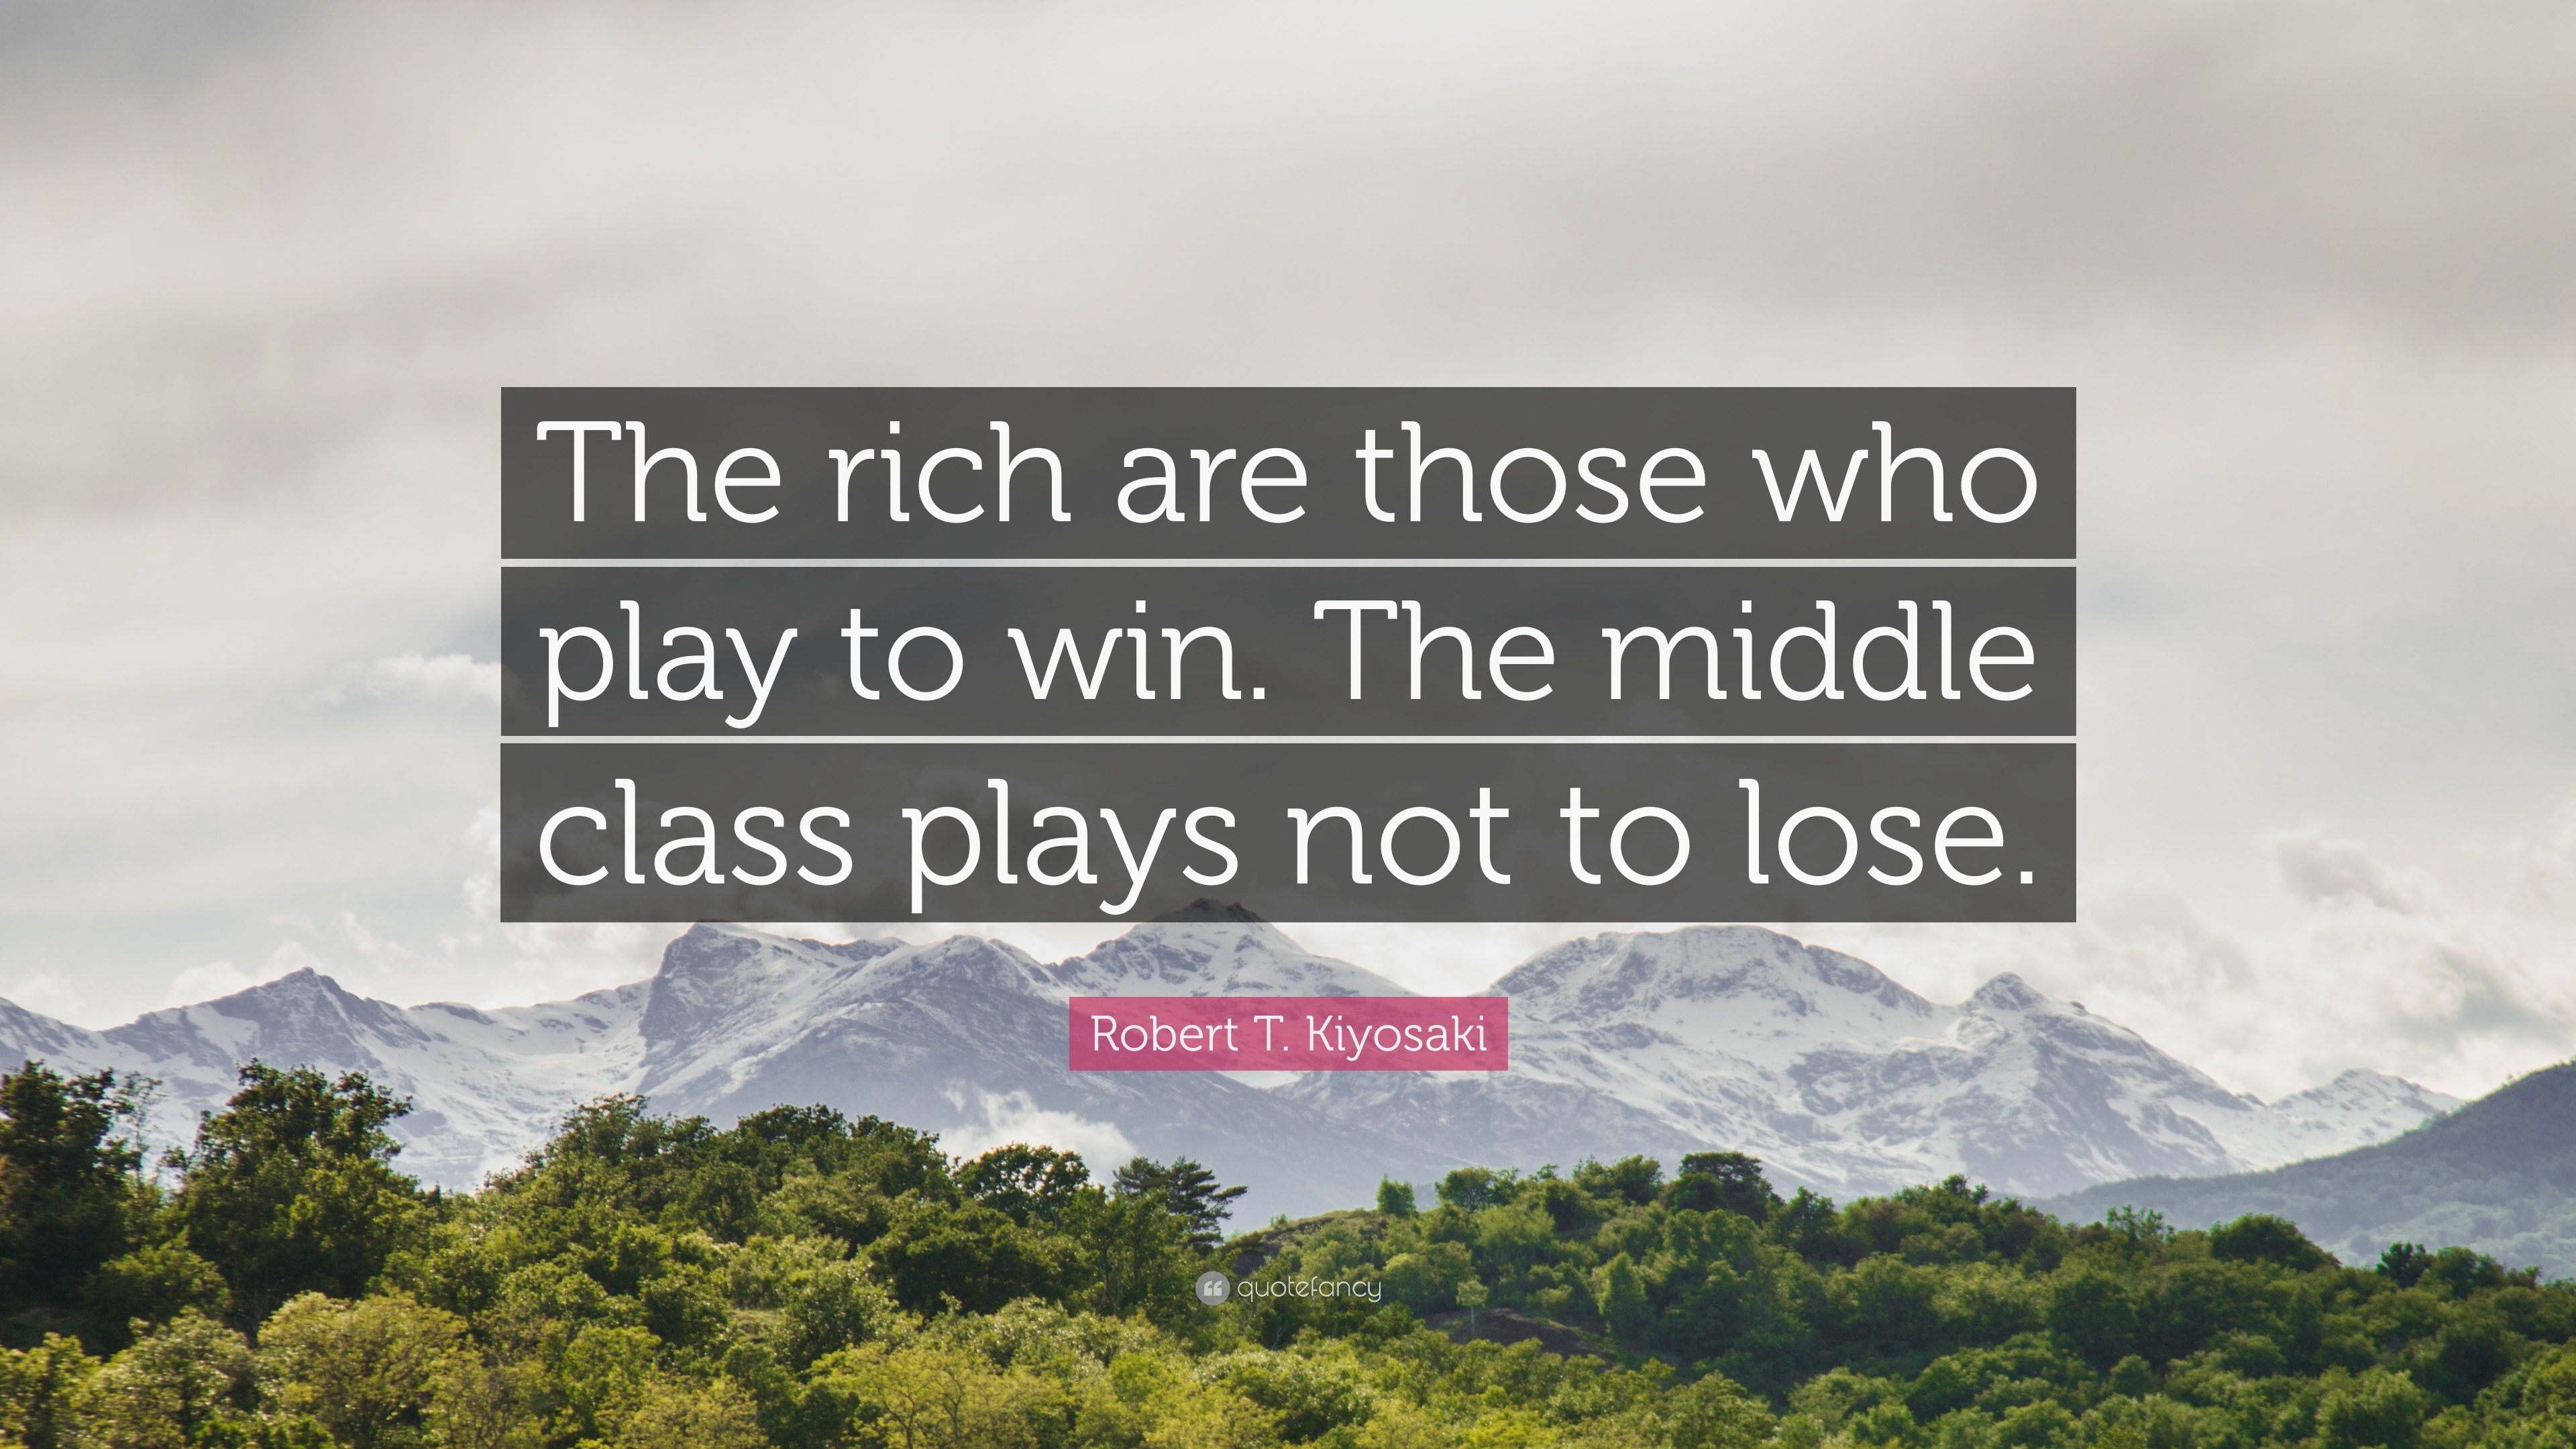 Robert T. Kiyosaki Quote: “The Rich Are Those Who Play To Win. The Middle Class Plays